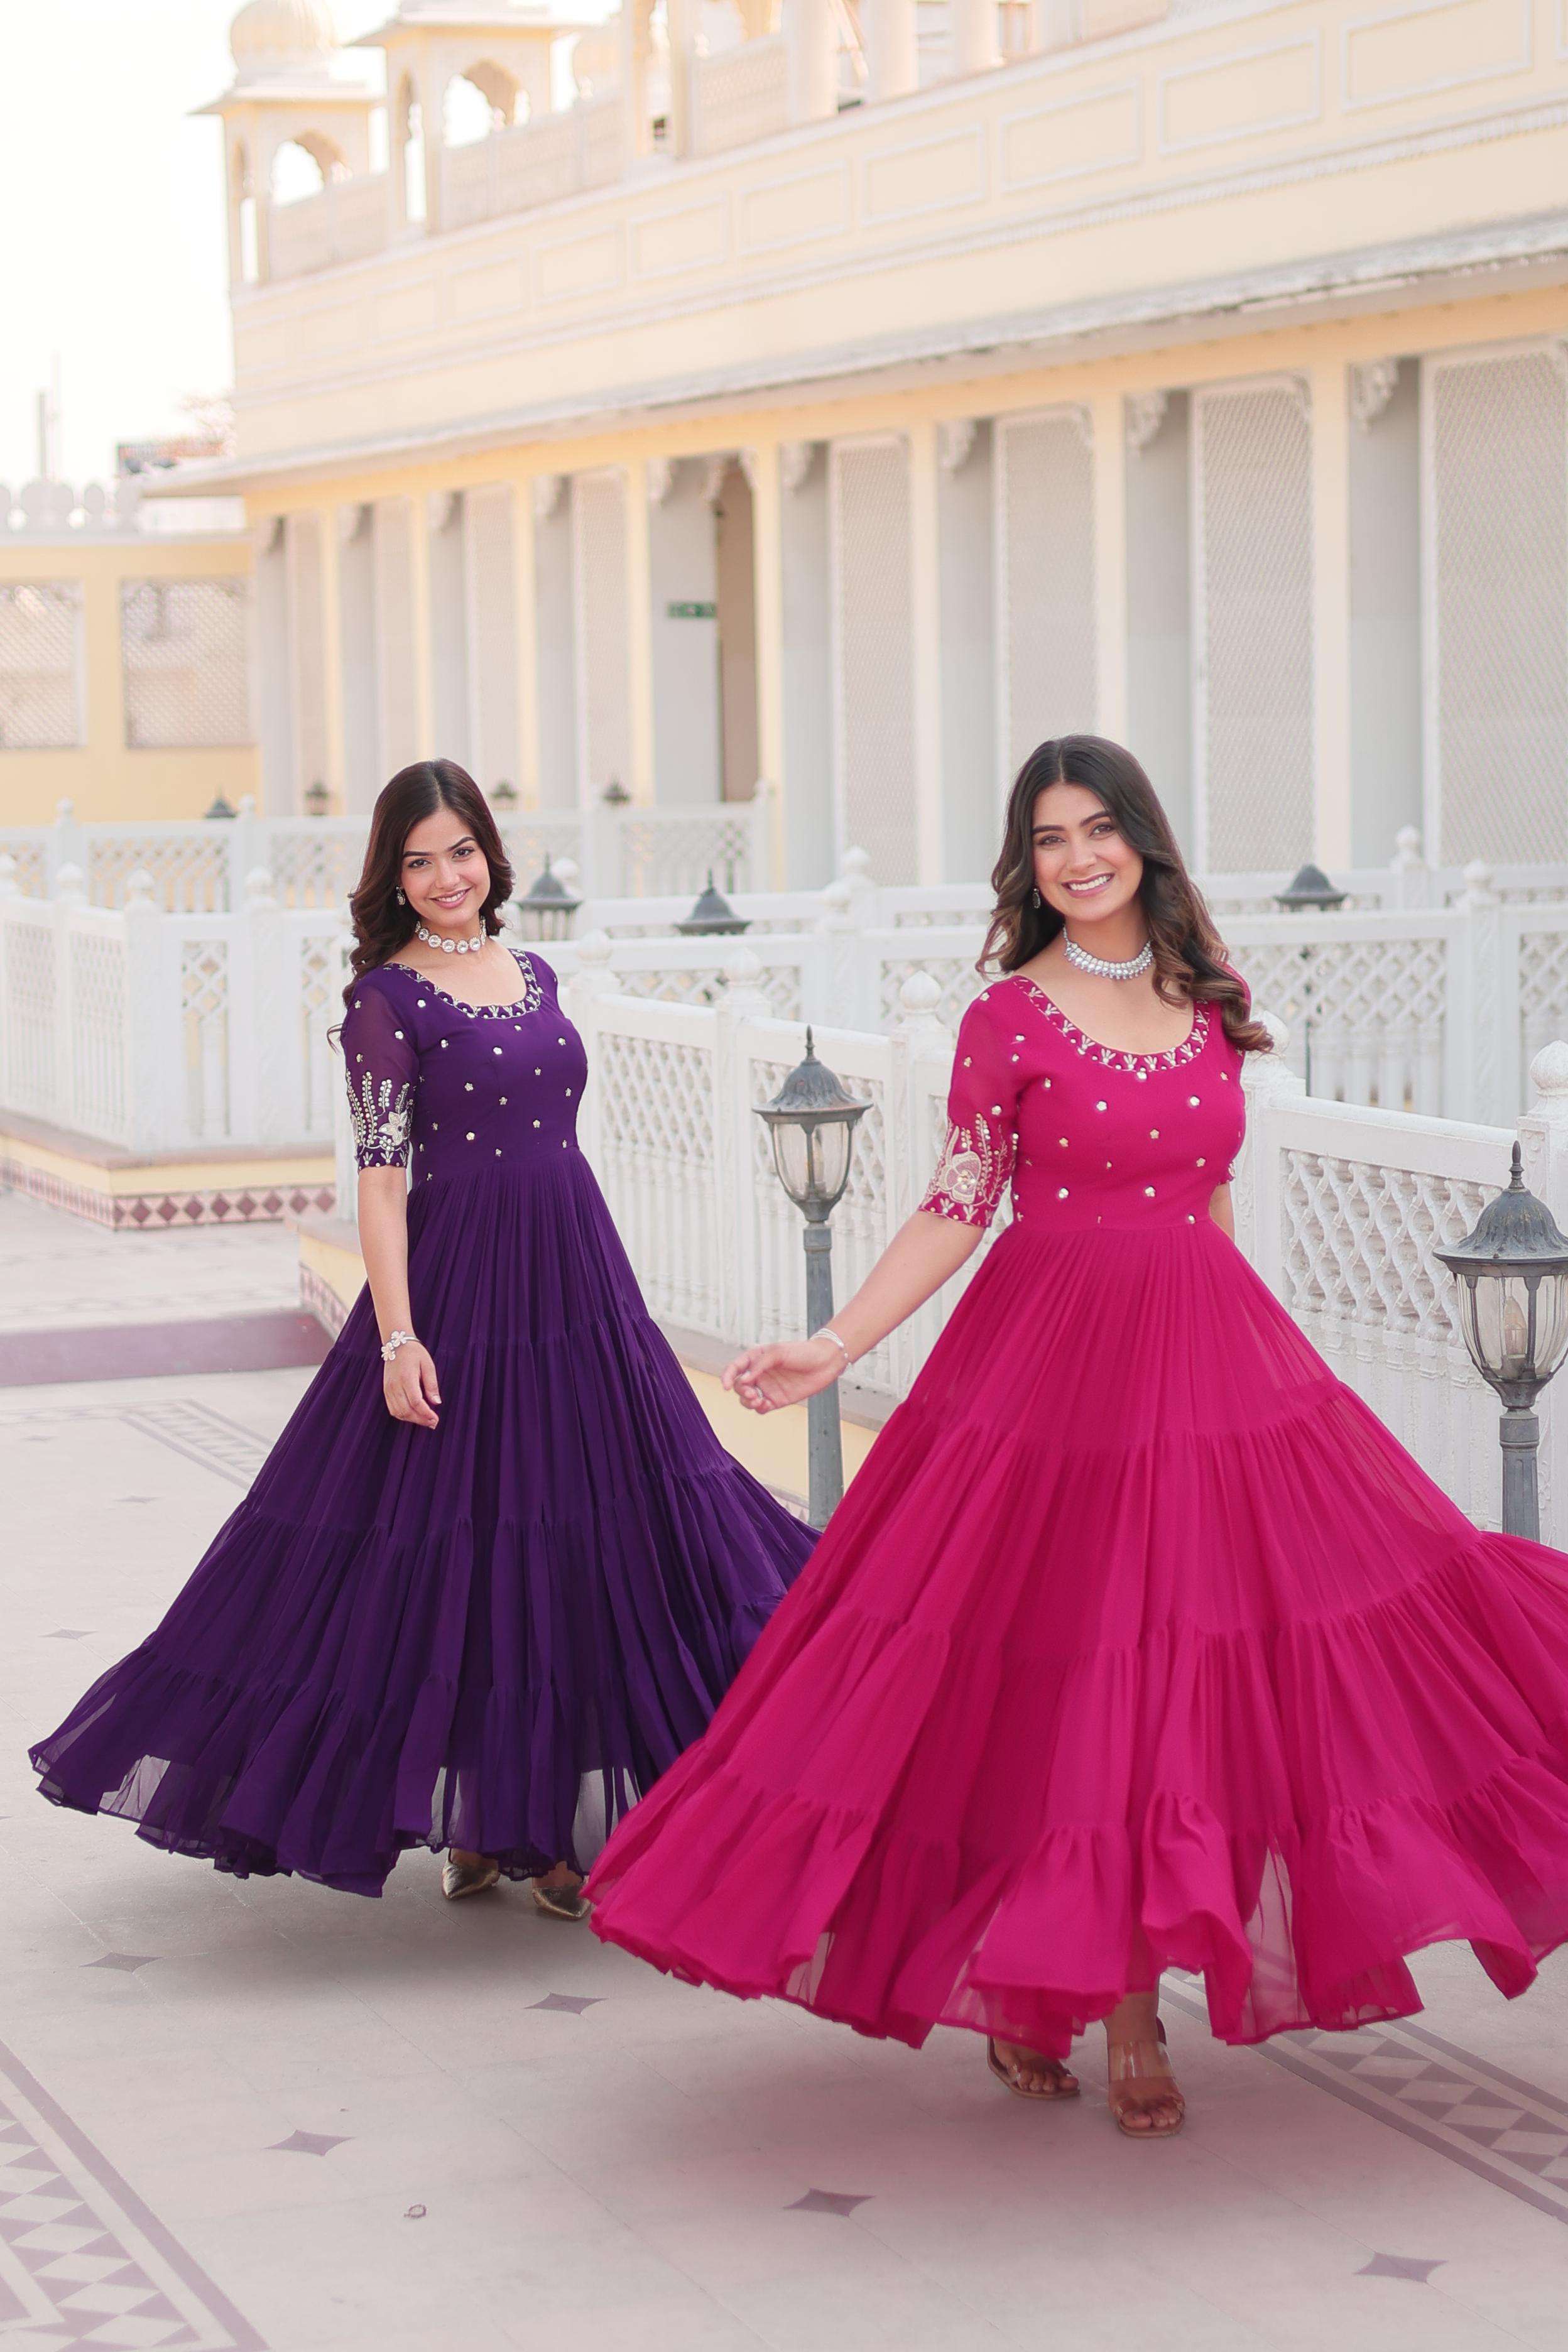 gown code ka 1097 designer gown is luxury clothing considered to be high quality made by zari thread n sequins embroidery this is made for desirable womens who deserve it